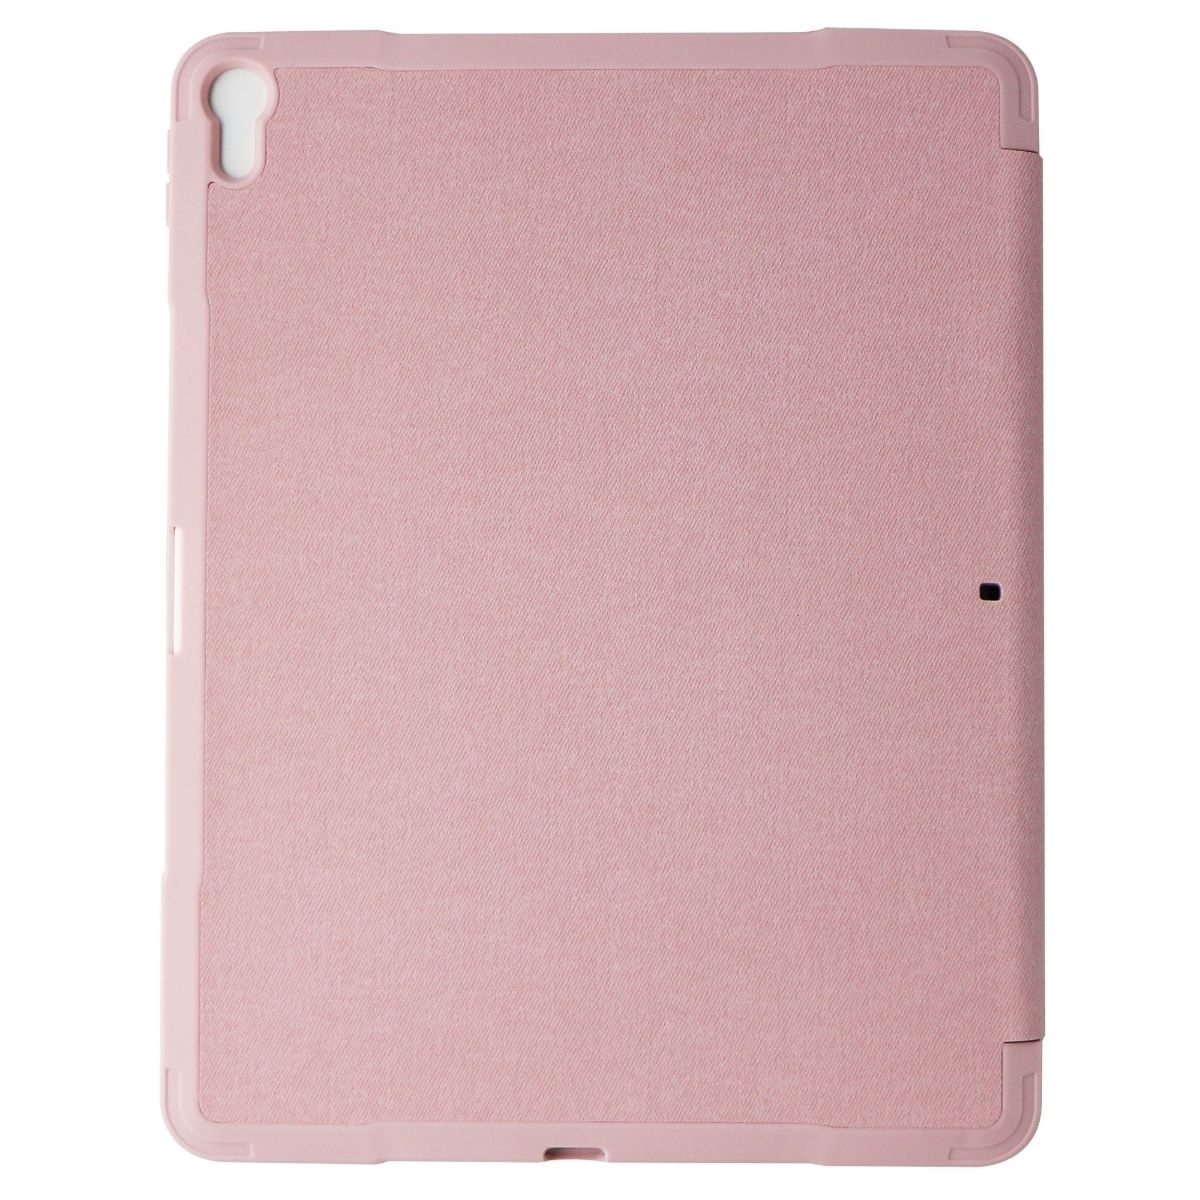 Verizon Soft Folio Case And Glass Screen For IPad Pro 11-inch (2018 Only) - Pink